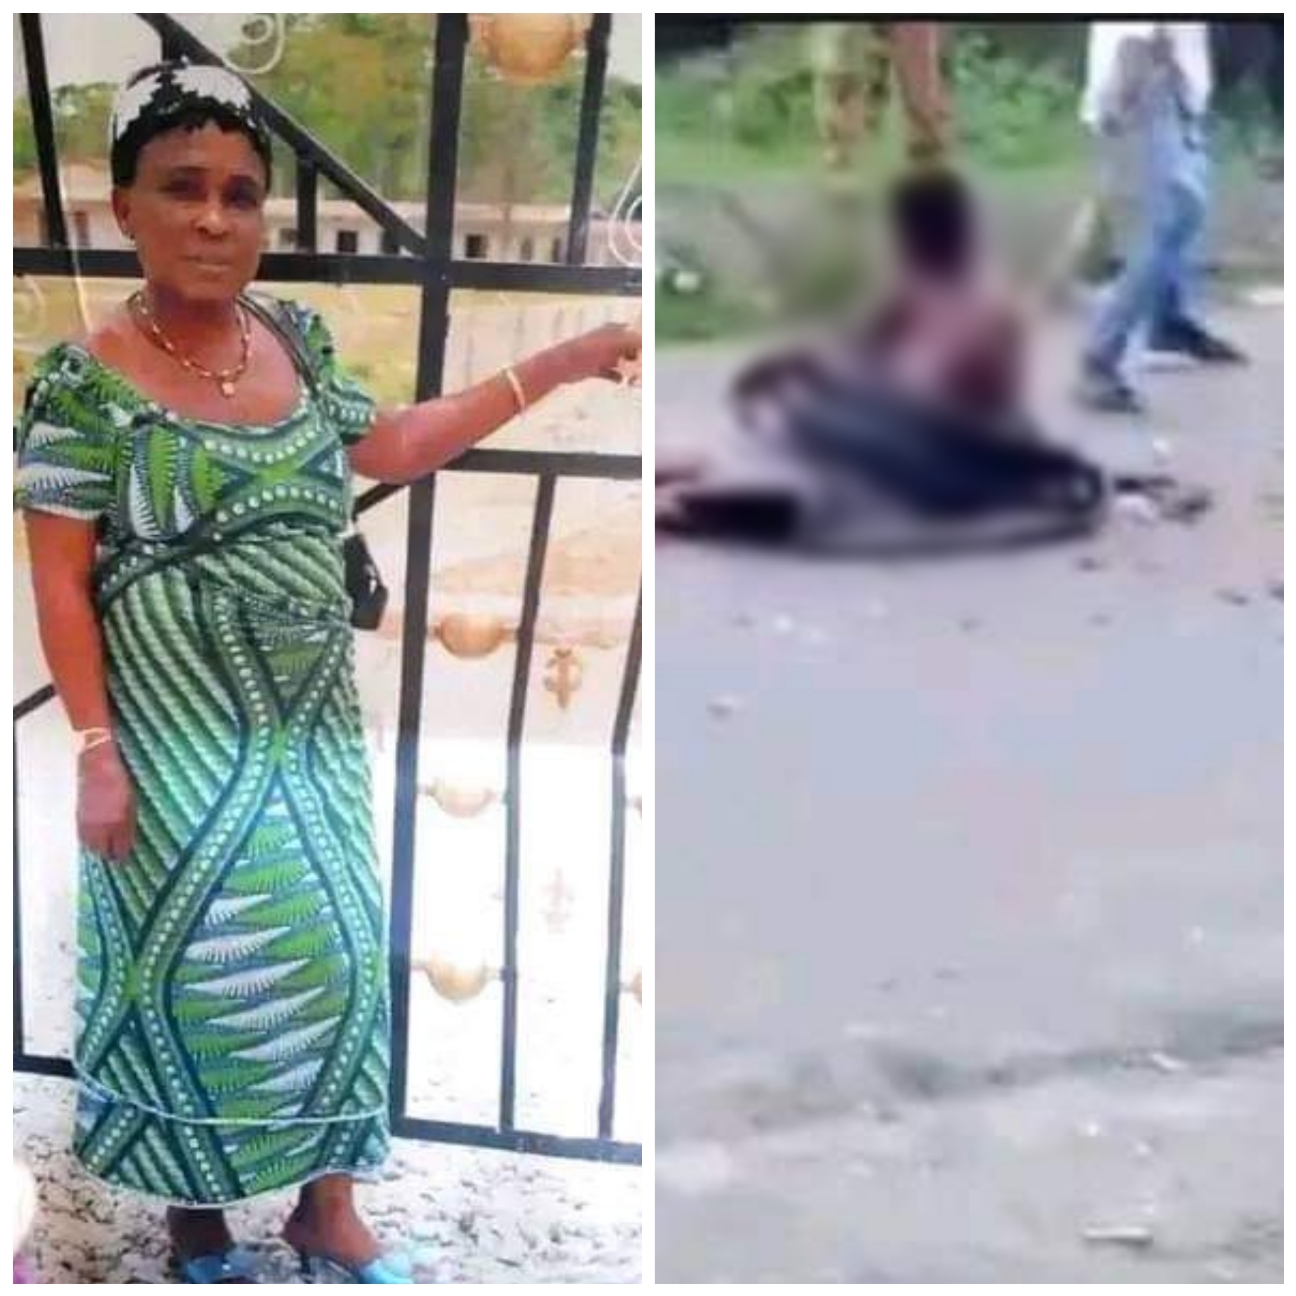 Police arrest 26 suspects over gruesome murder of woman accused of witchcraft in Cross River